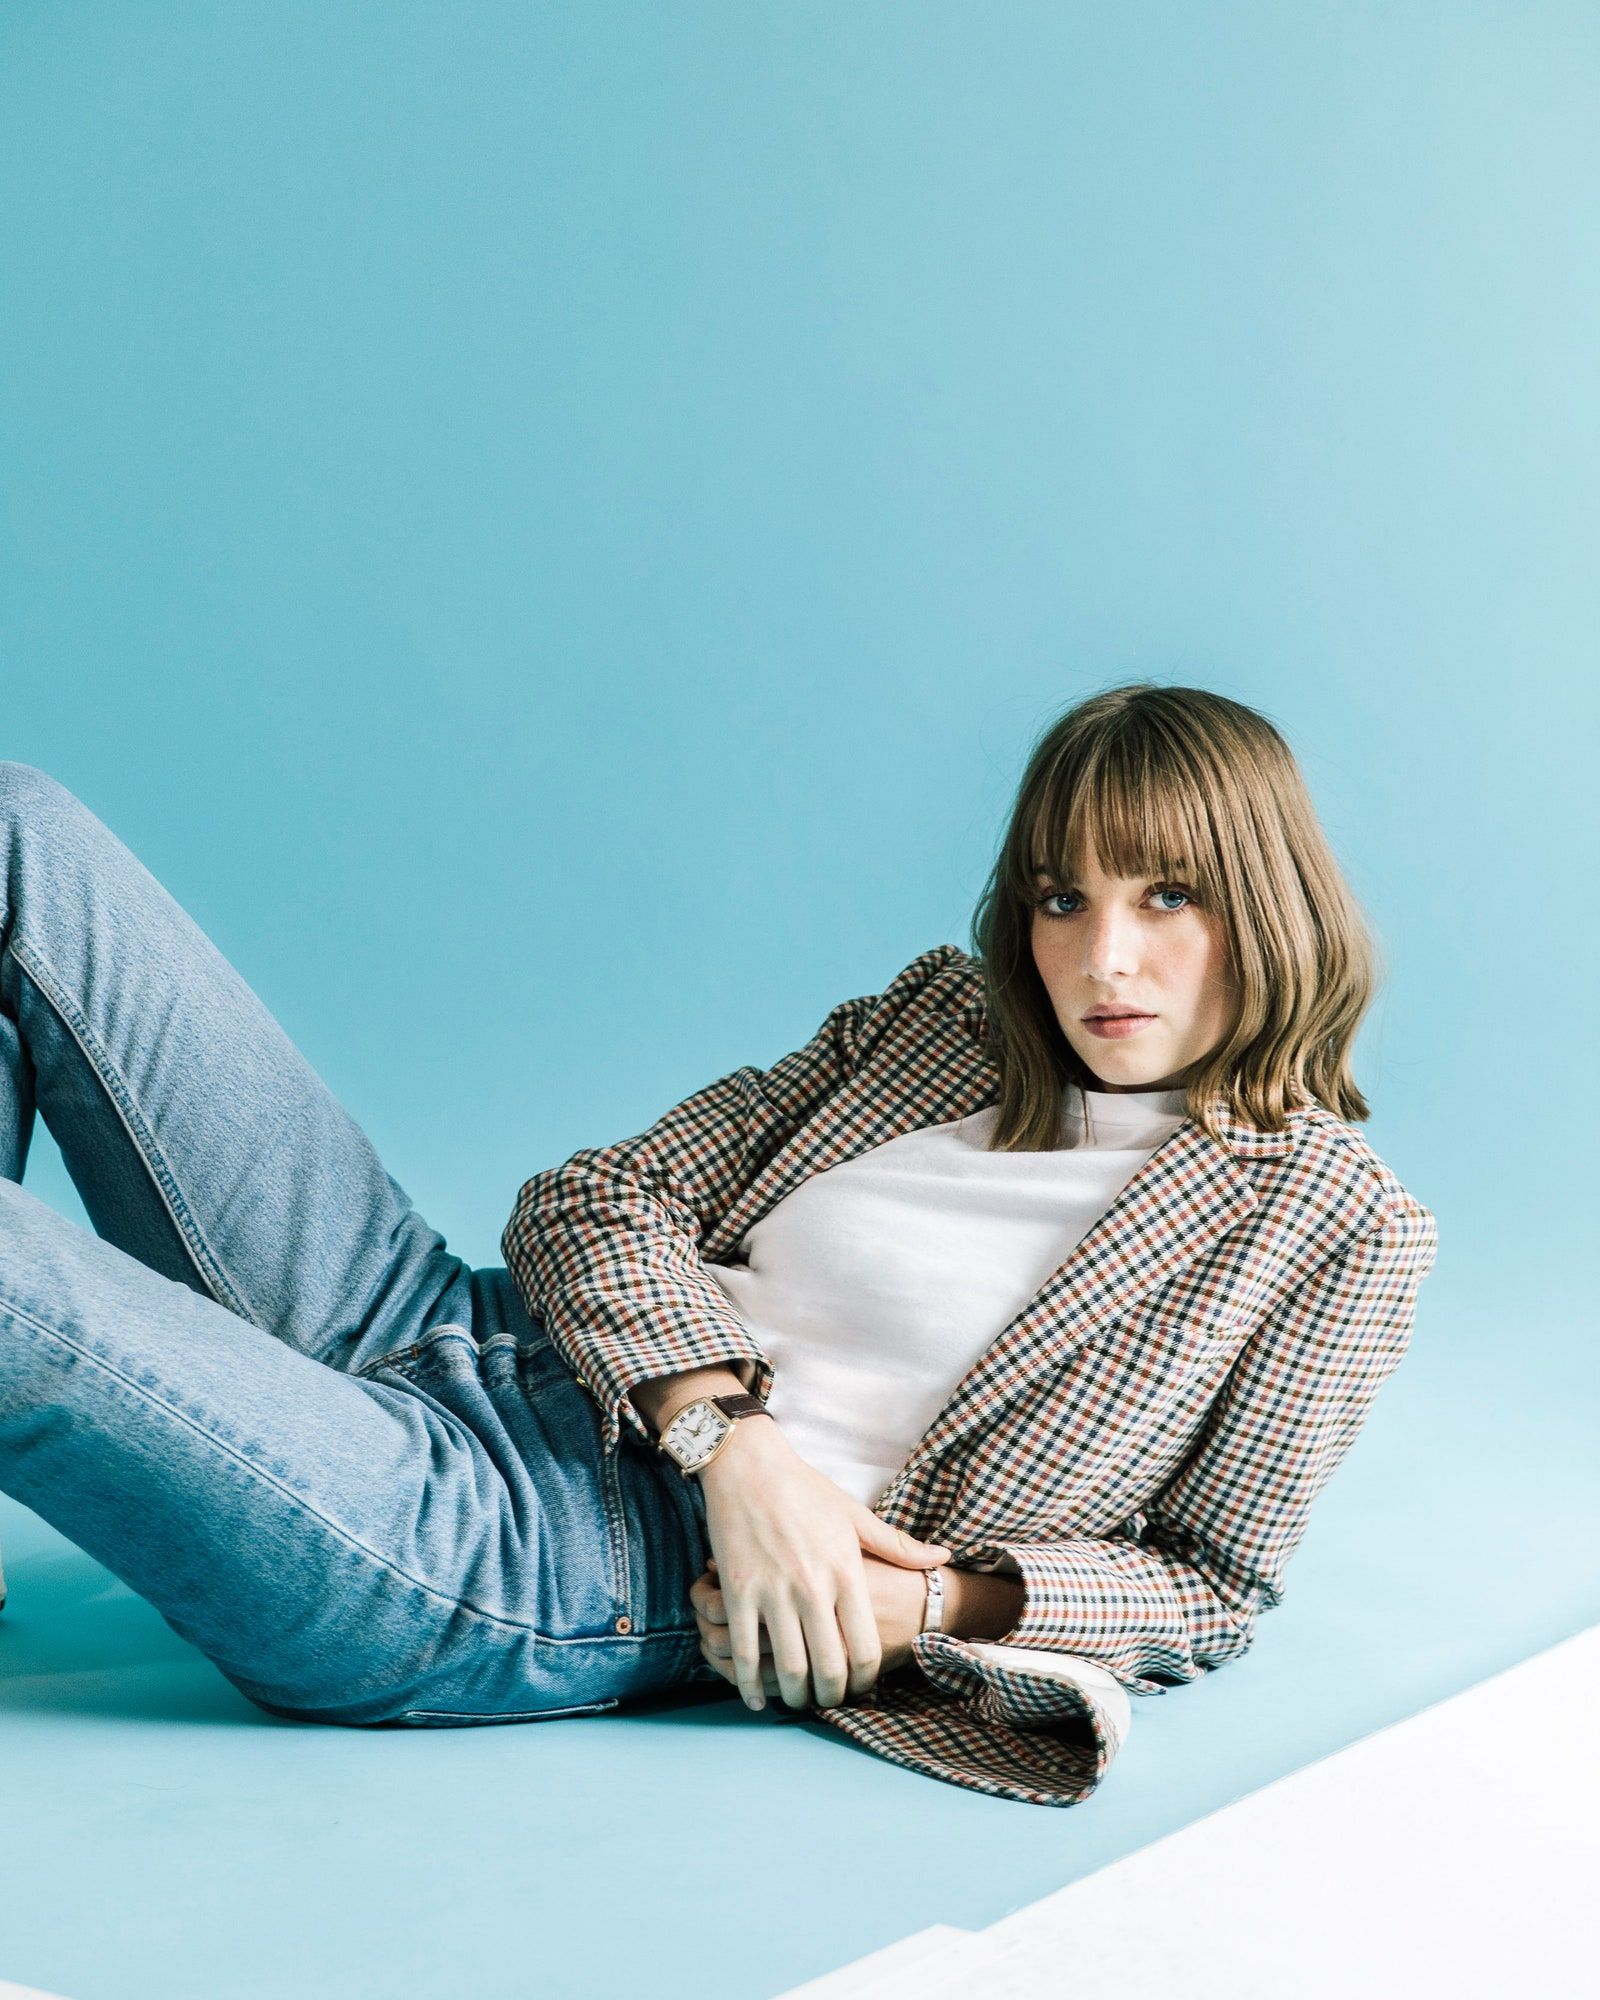 Maya Hawke on the 'Stranger Things' Hype, Fame, and What's Next